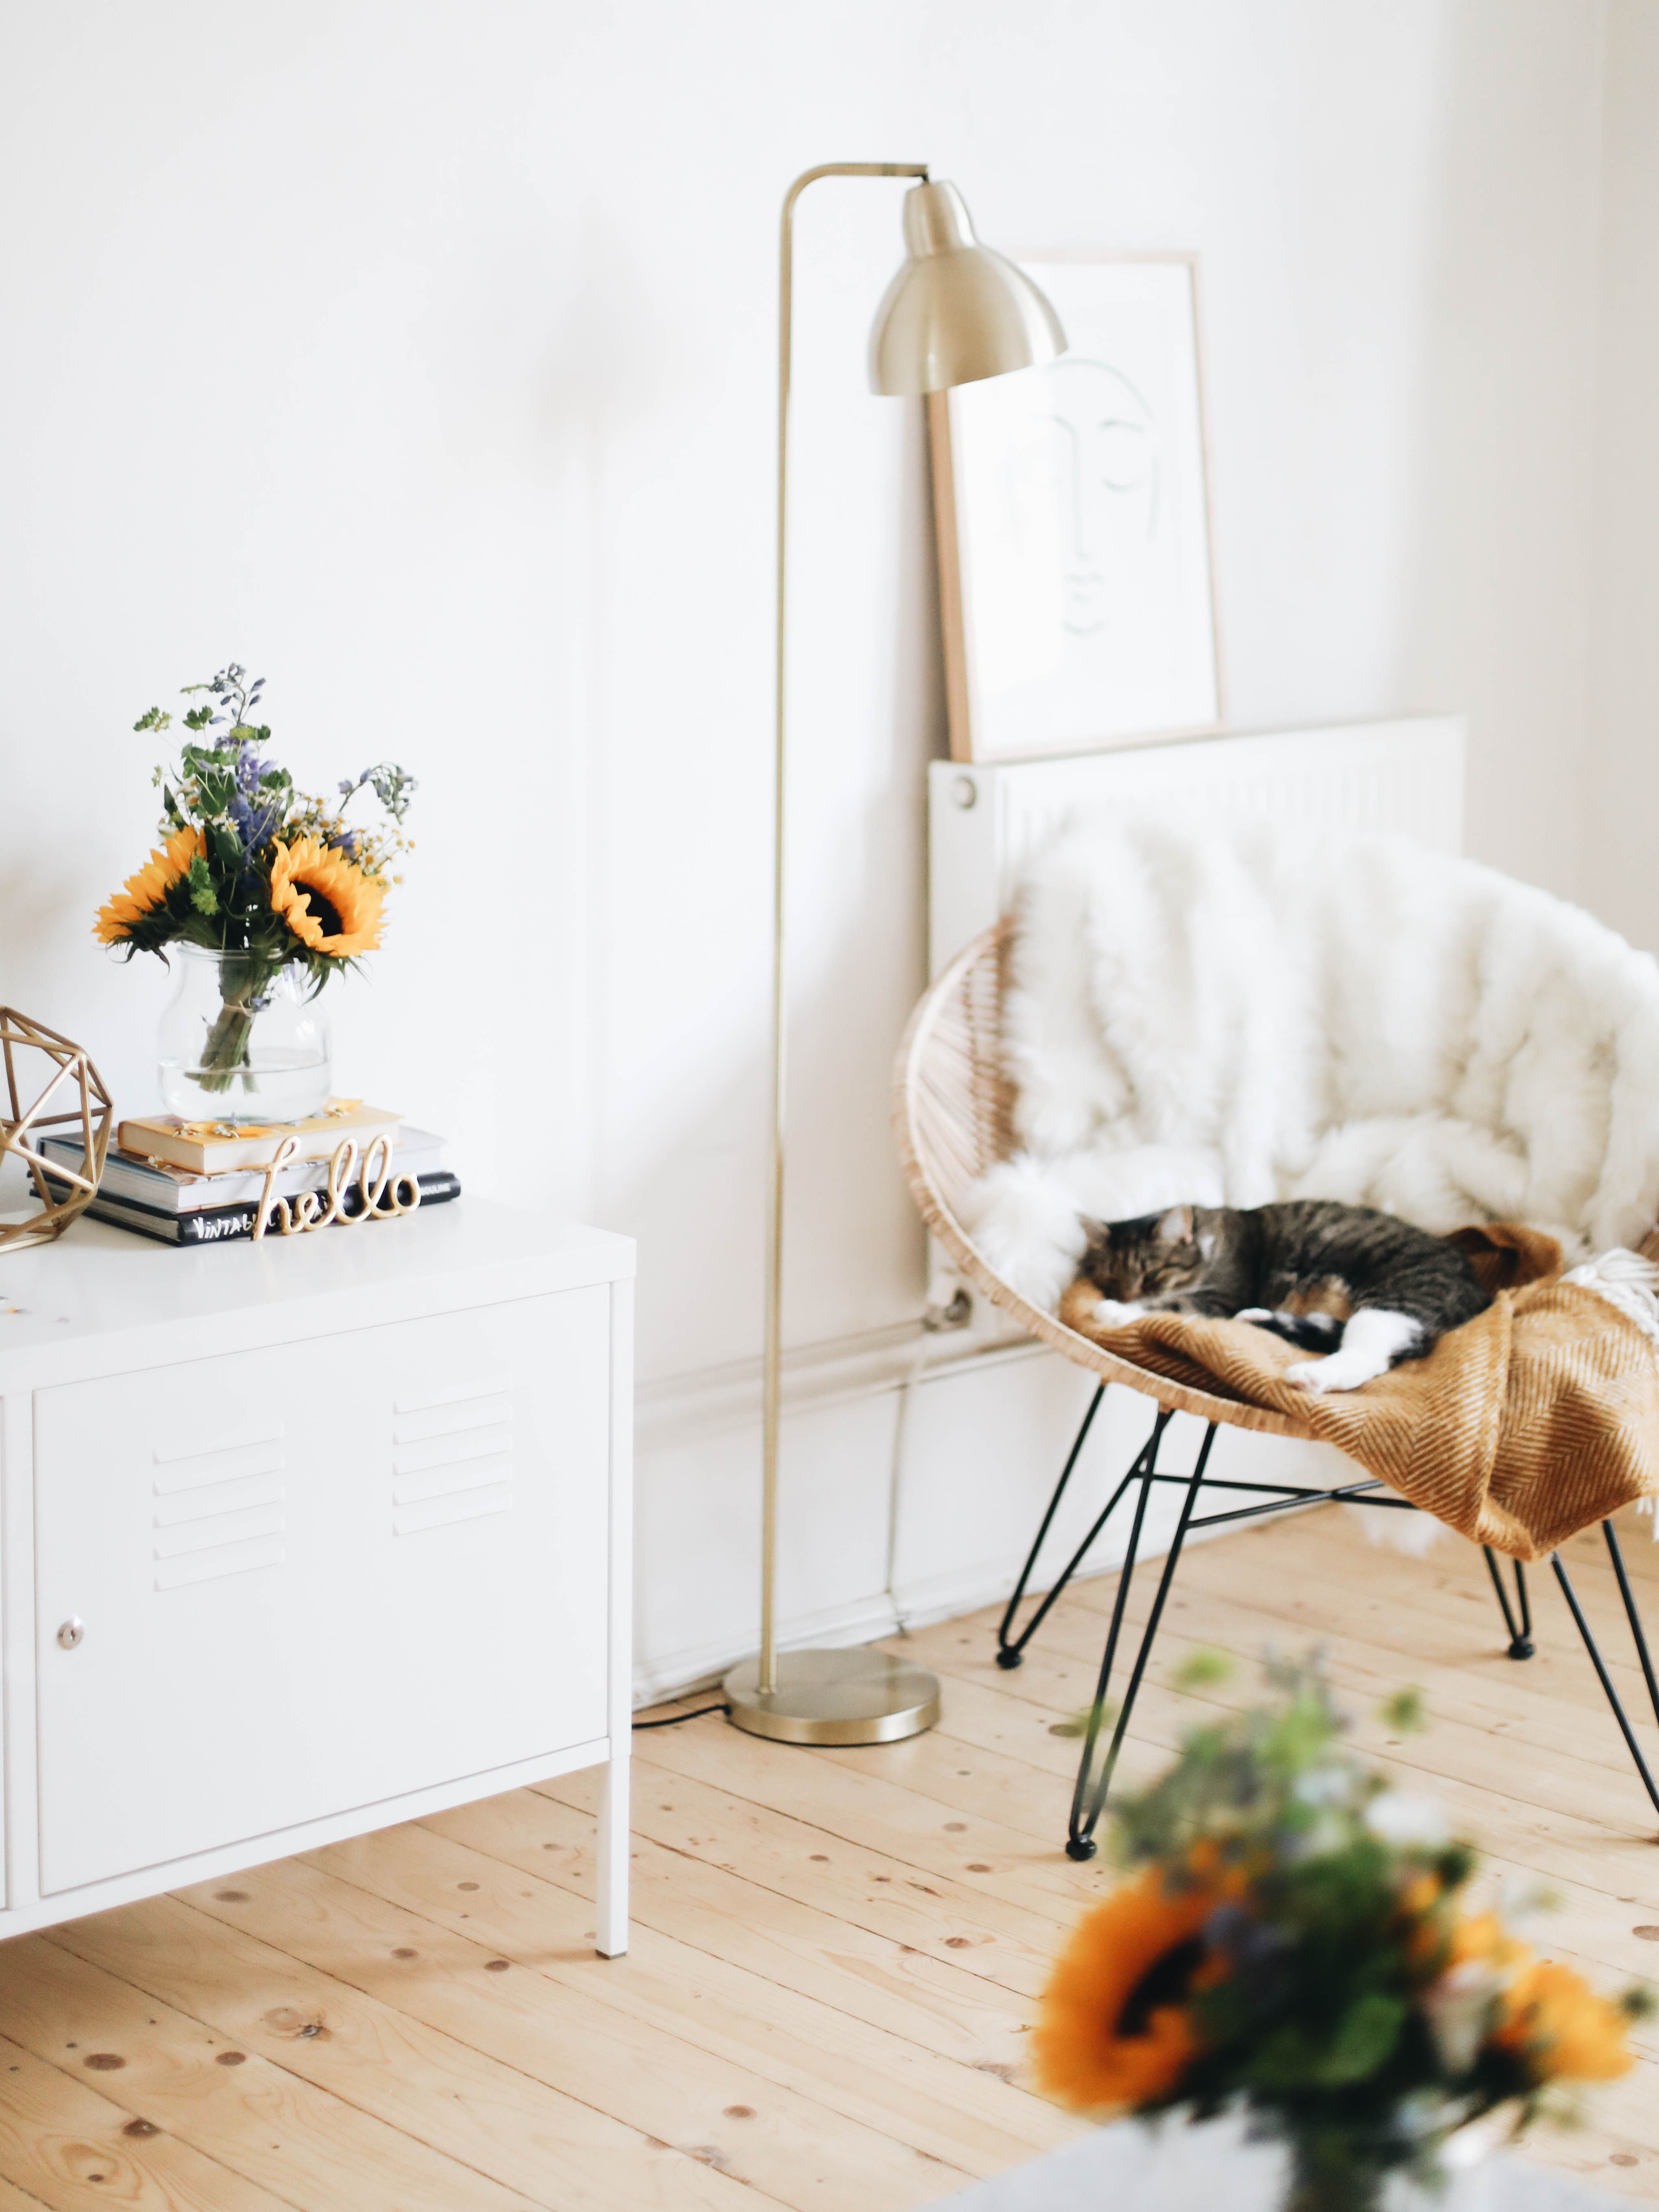 Home Decorating Pieces I'm Loving Right Now. - KATE LA VIE by Kate Spiers